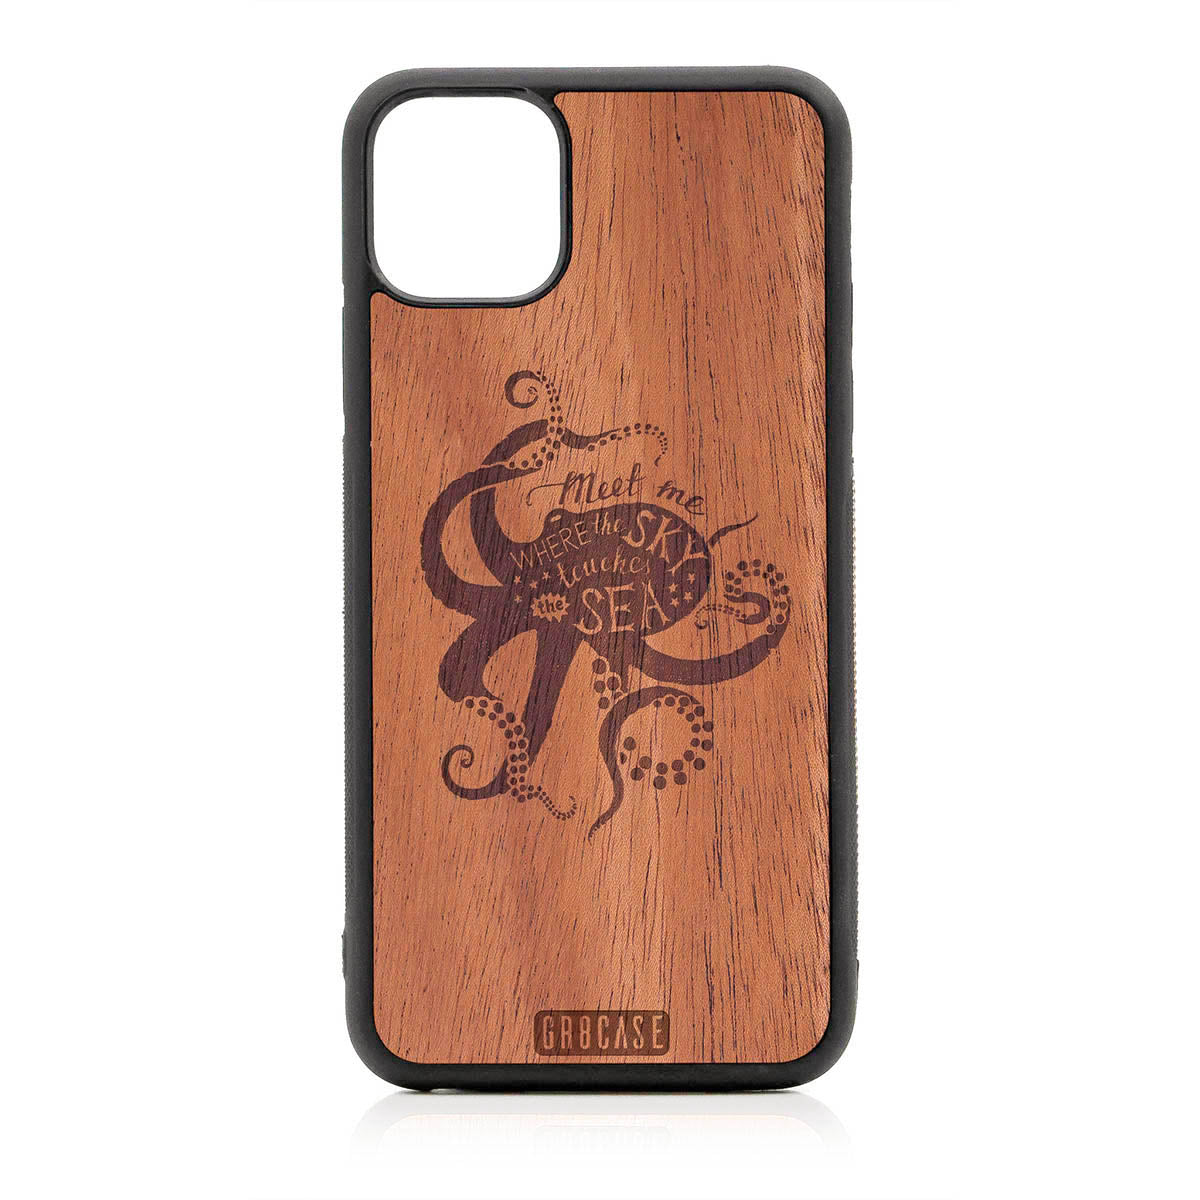 Meet Me Where The Sky Touches The Sea (Octopus) Design Wood Case For iPhone 11 Pro Max